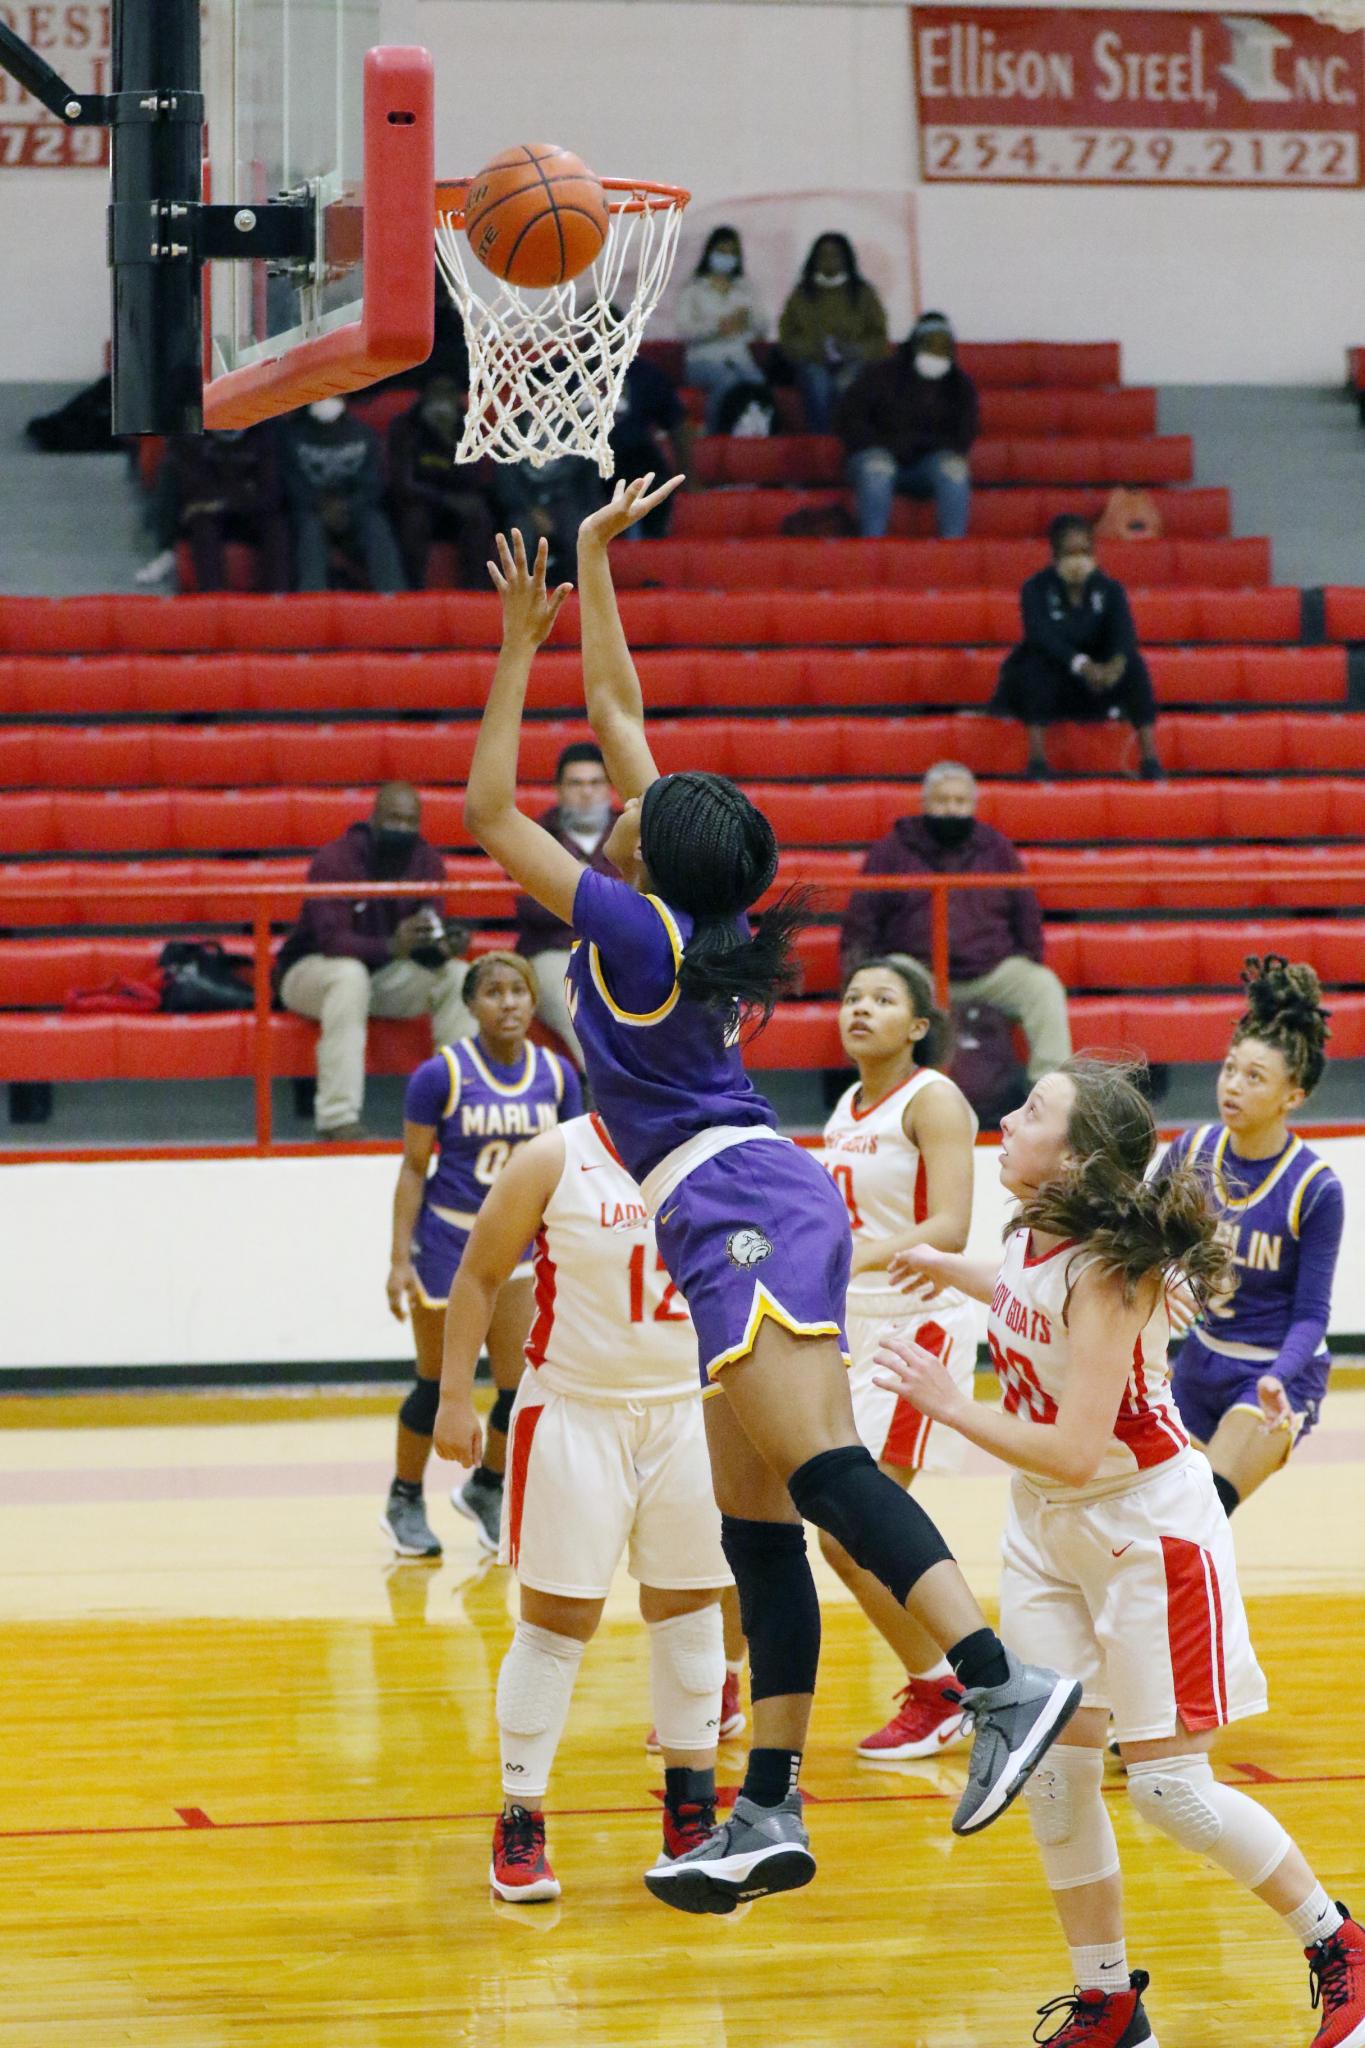 Marlin's Aniya Williams scores two of her 23 points against Groesbeck on Friday night. The Lady Bulldogs won their sixth consecutive game, 59-47.Photo by Angela Crane/For the Marlin Democrat